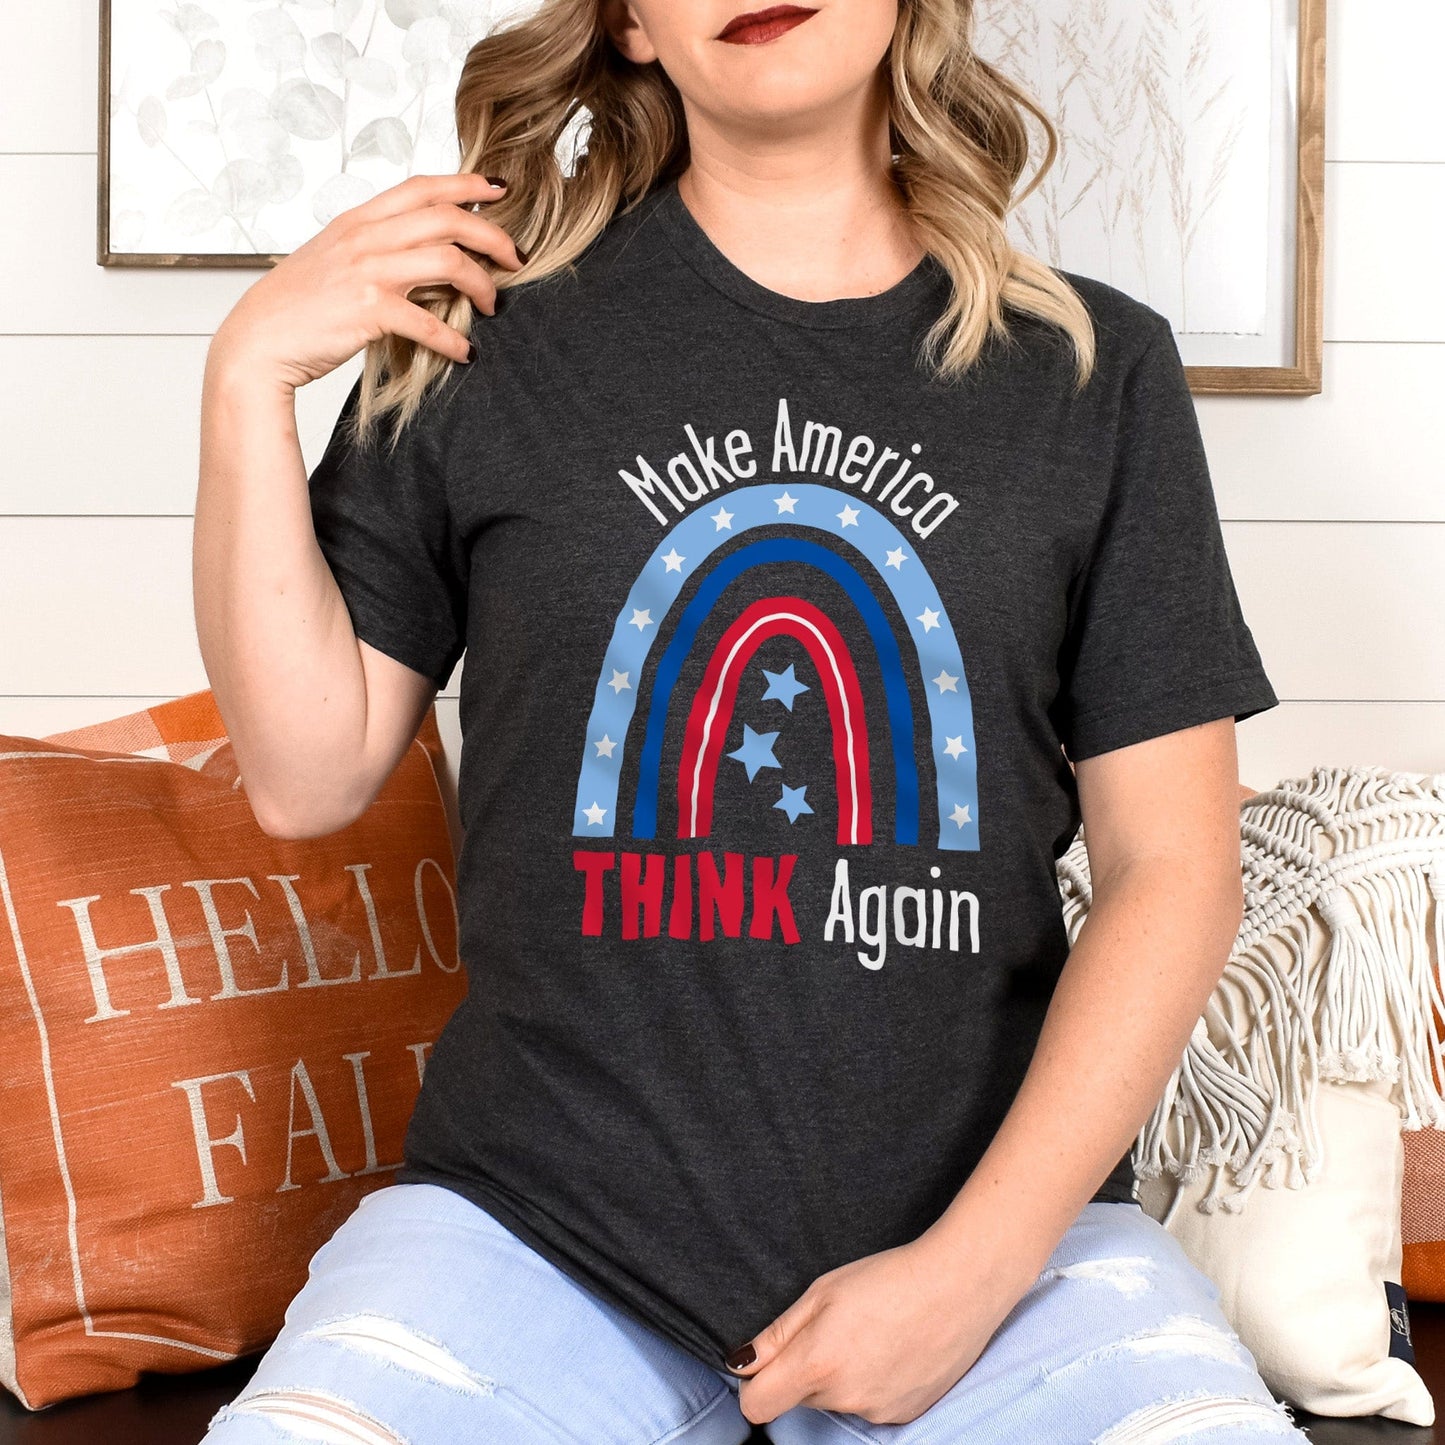 Dark Grey Heather color unisex t-shirt that says, “Make America THINK Again” with a graphic of a blue and red rainbow. “Make America” is red and arched over the rainbow. “THINK Again” is beneath the rainbow with “THINK” being blue and “Again” being red.